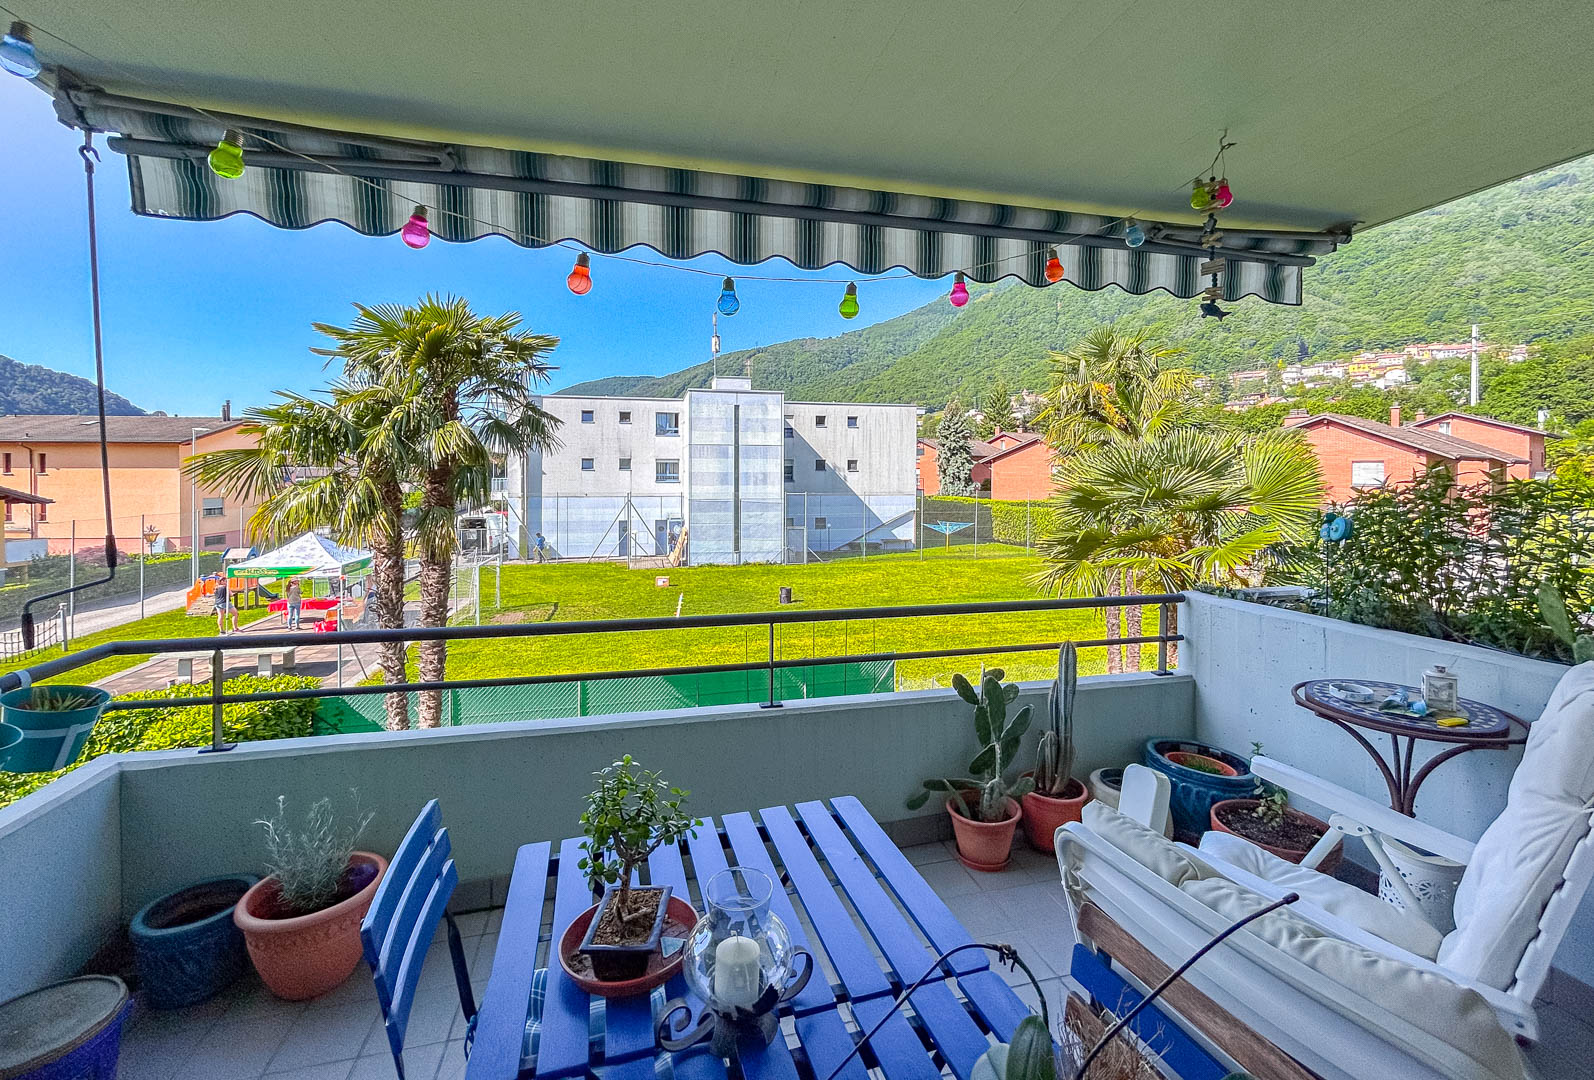 4.5-room apartment for sale in Taverne in a green and quiet area